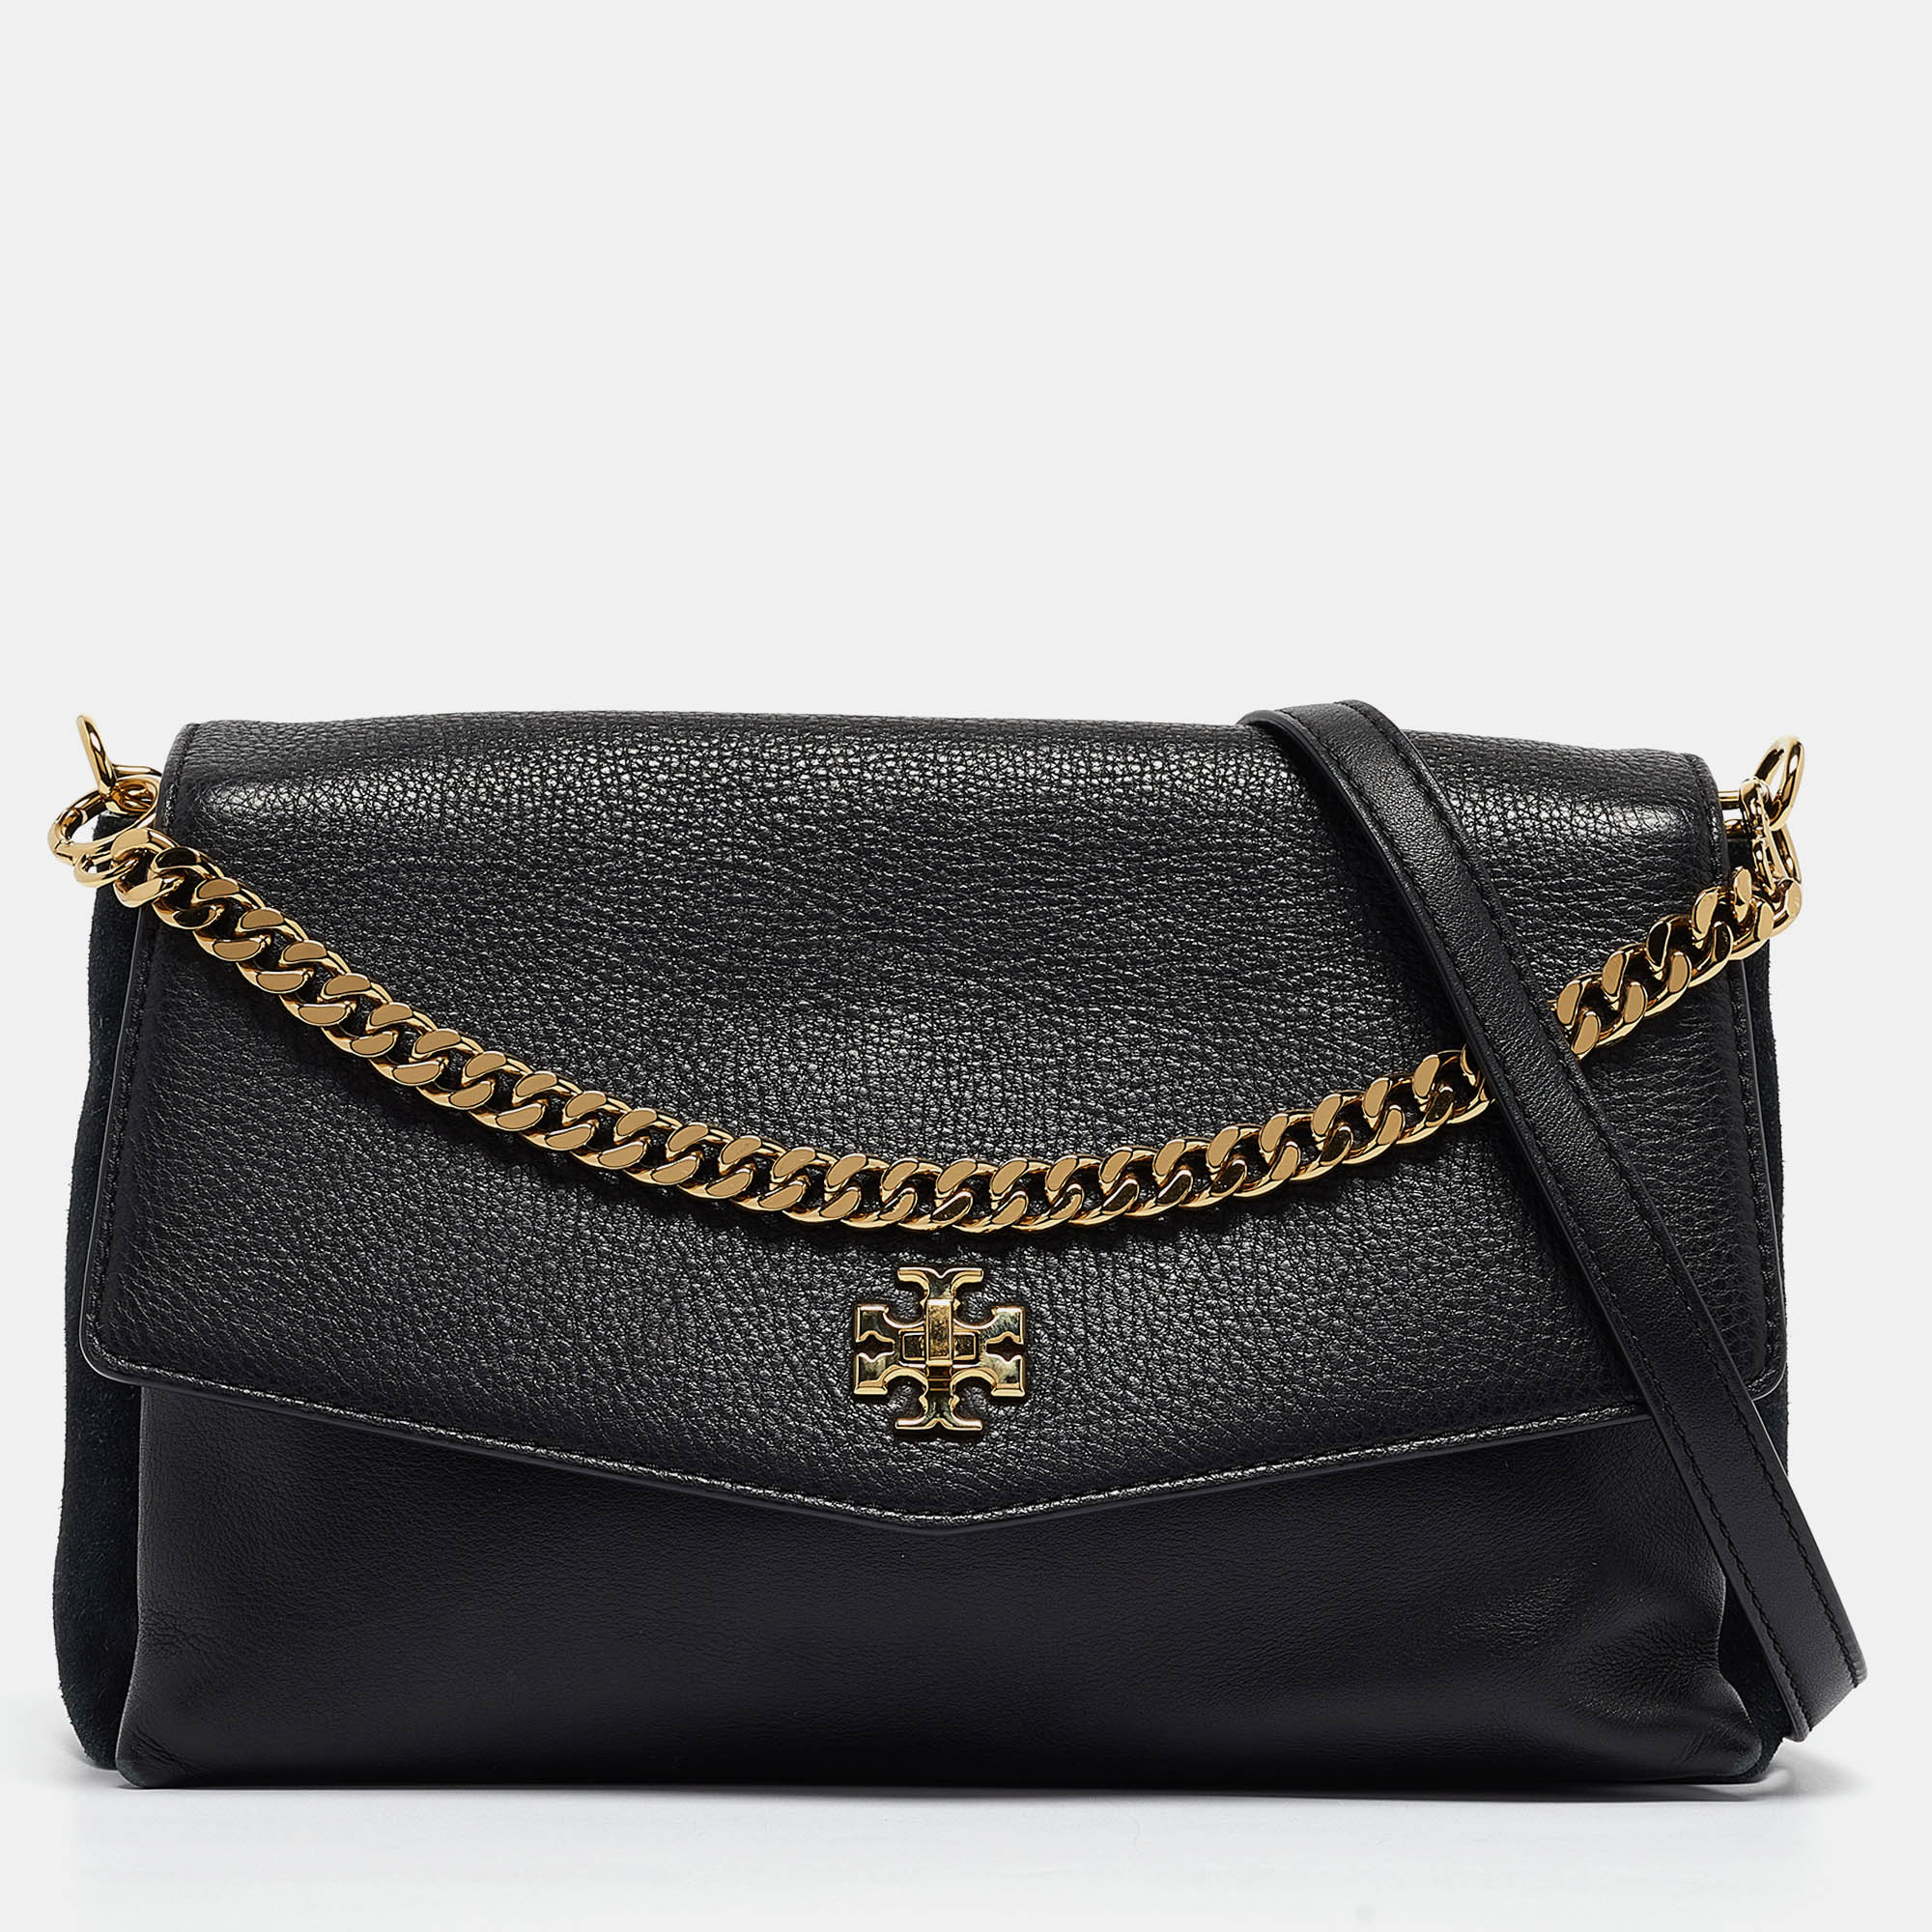 

Tory Burch Black Leather and Suede Kira Shoulder Bag